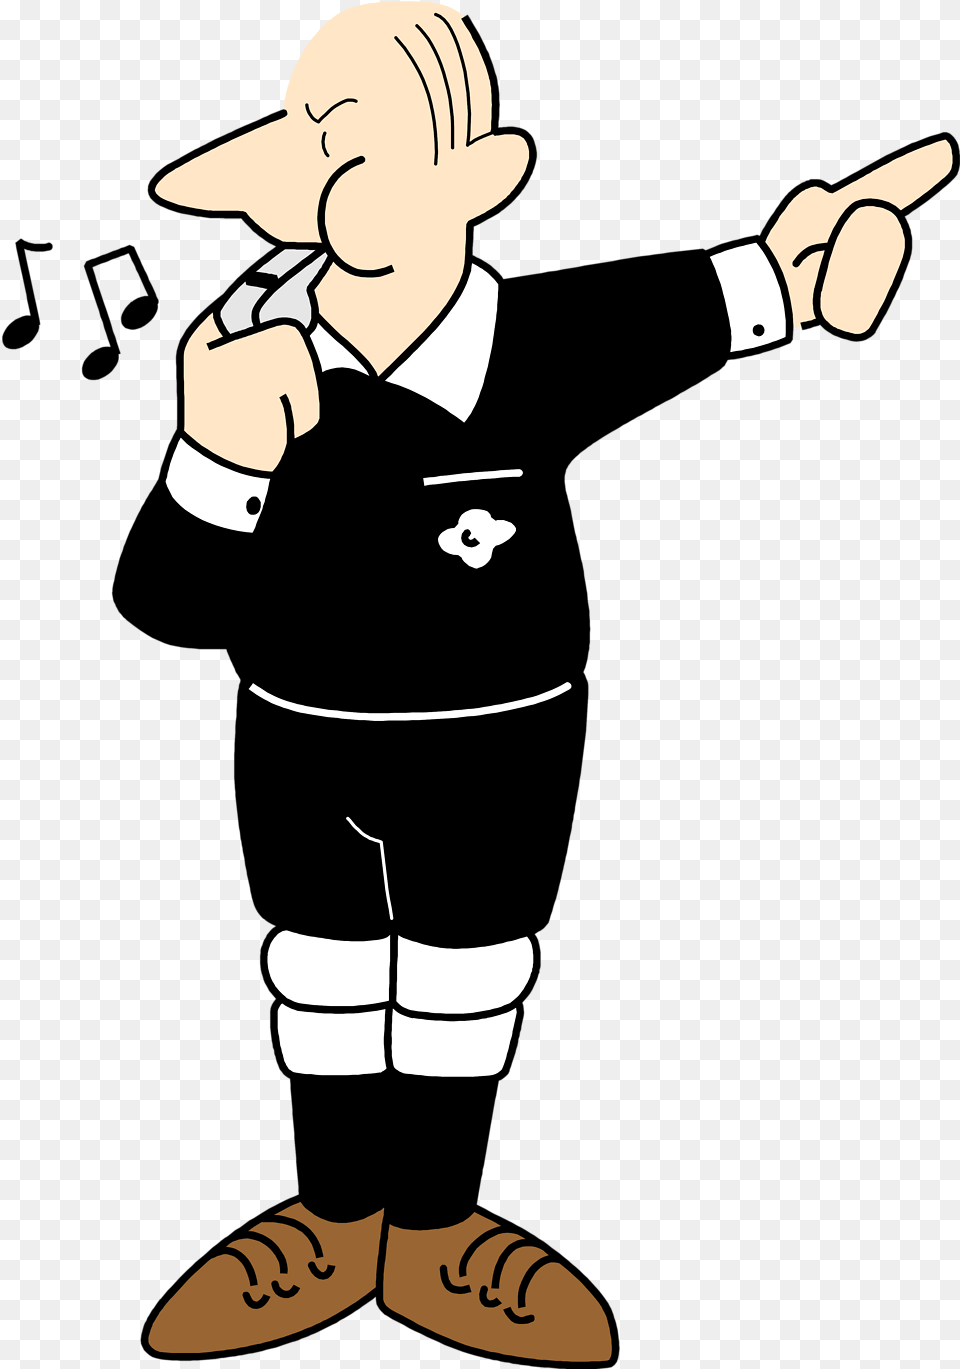 Library Of Football Referee Vector Referee Whistle Clip Art, Baby, Person, Hand, Body Part Free Transparent Png